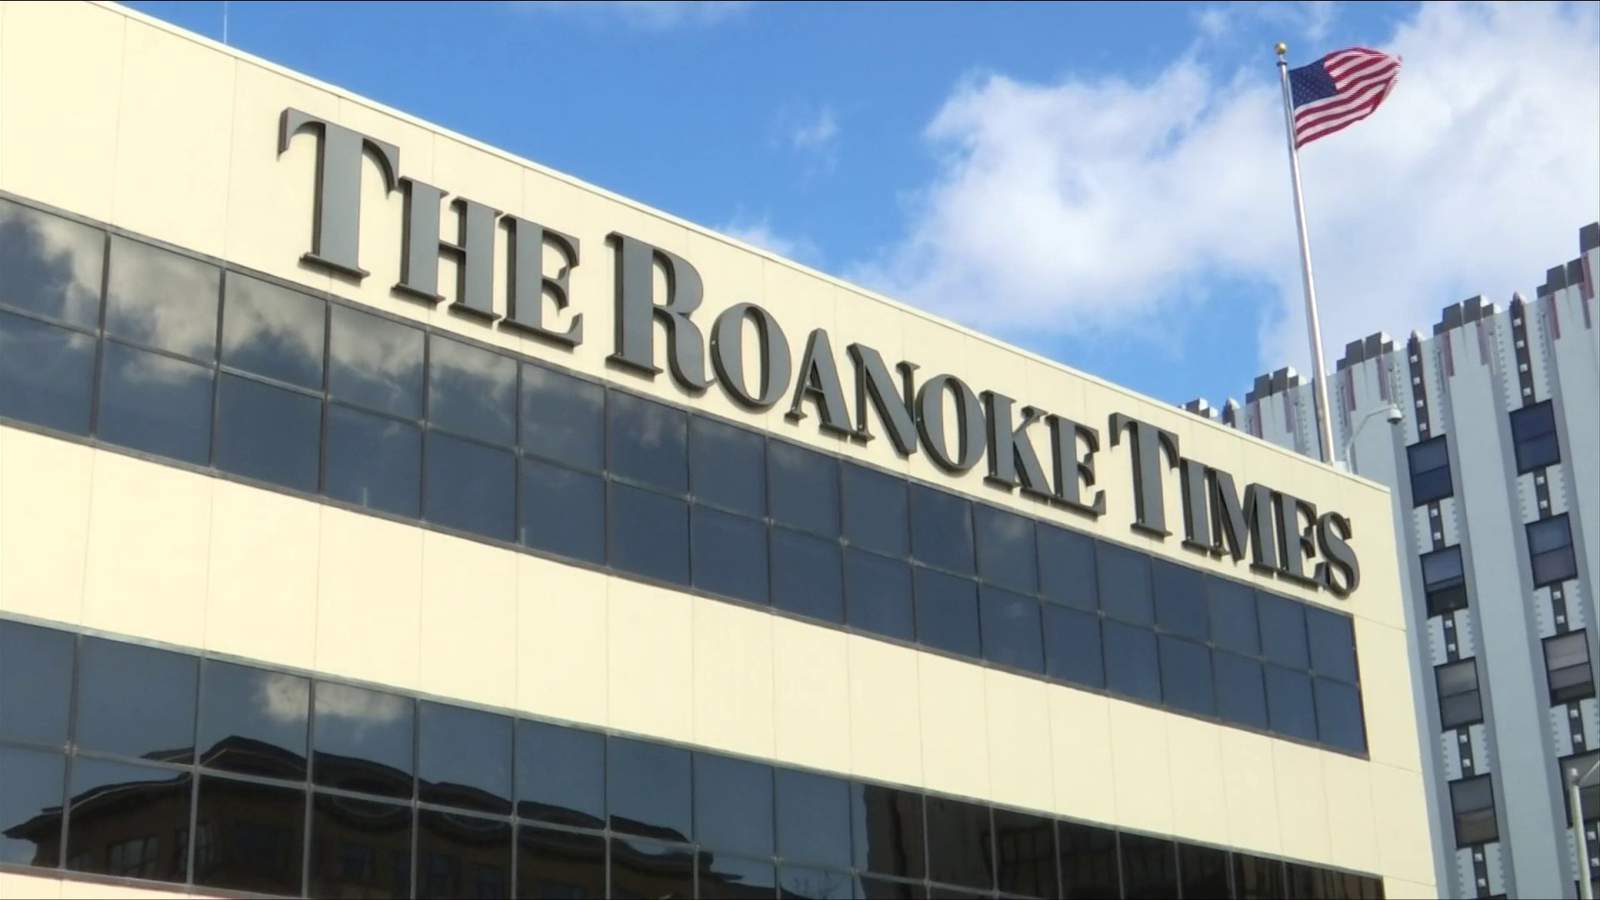 Roanoke Times building for sale after more than a century in downtown Roanoke